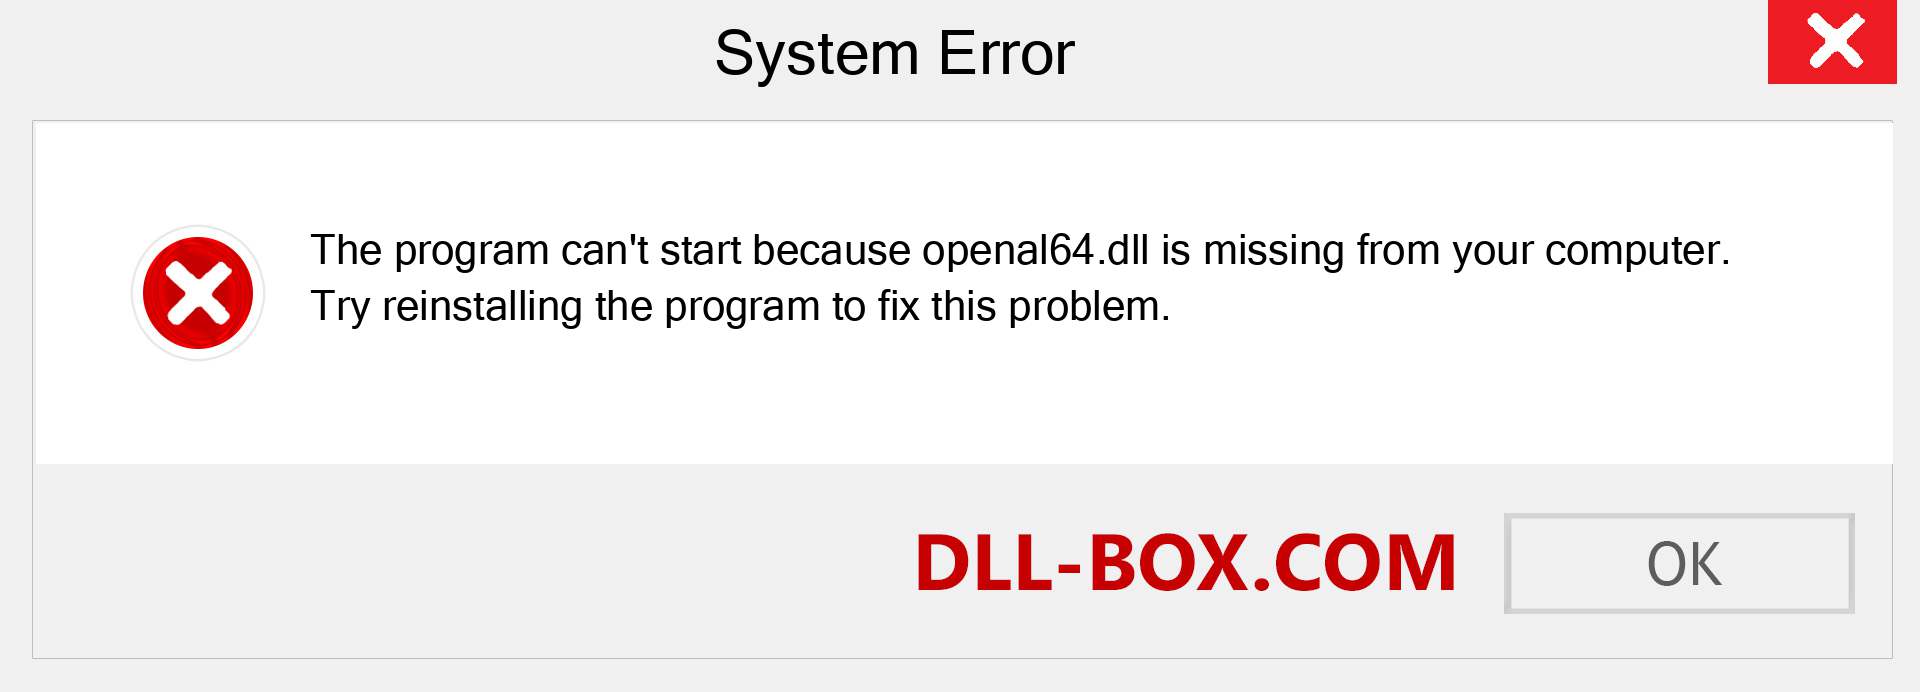  openal64.dll file is missing?. Download for Windows 7, 8, 10 - Fix  openal64 dll Missing Error on Windows, photos, images